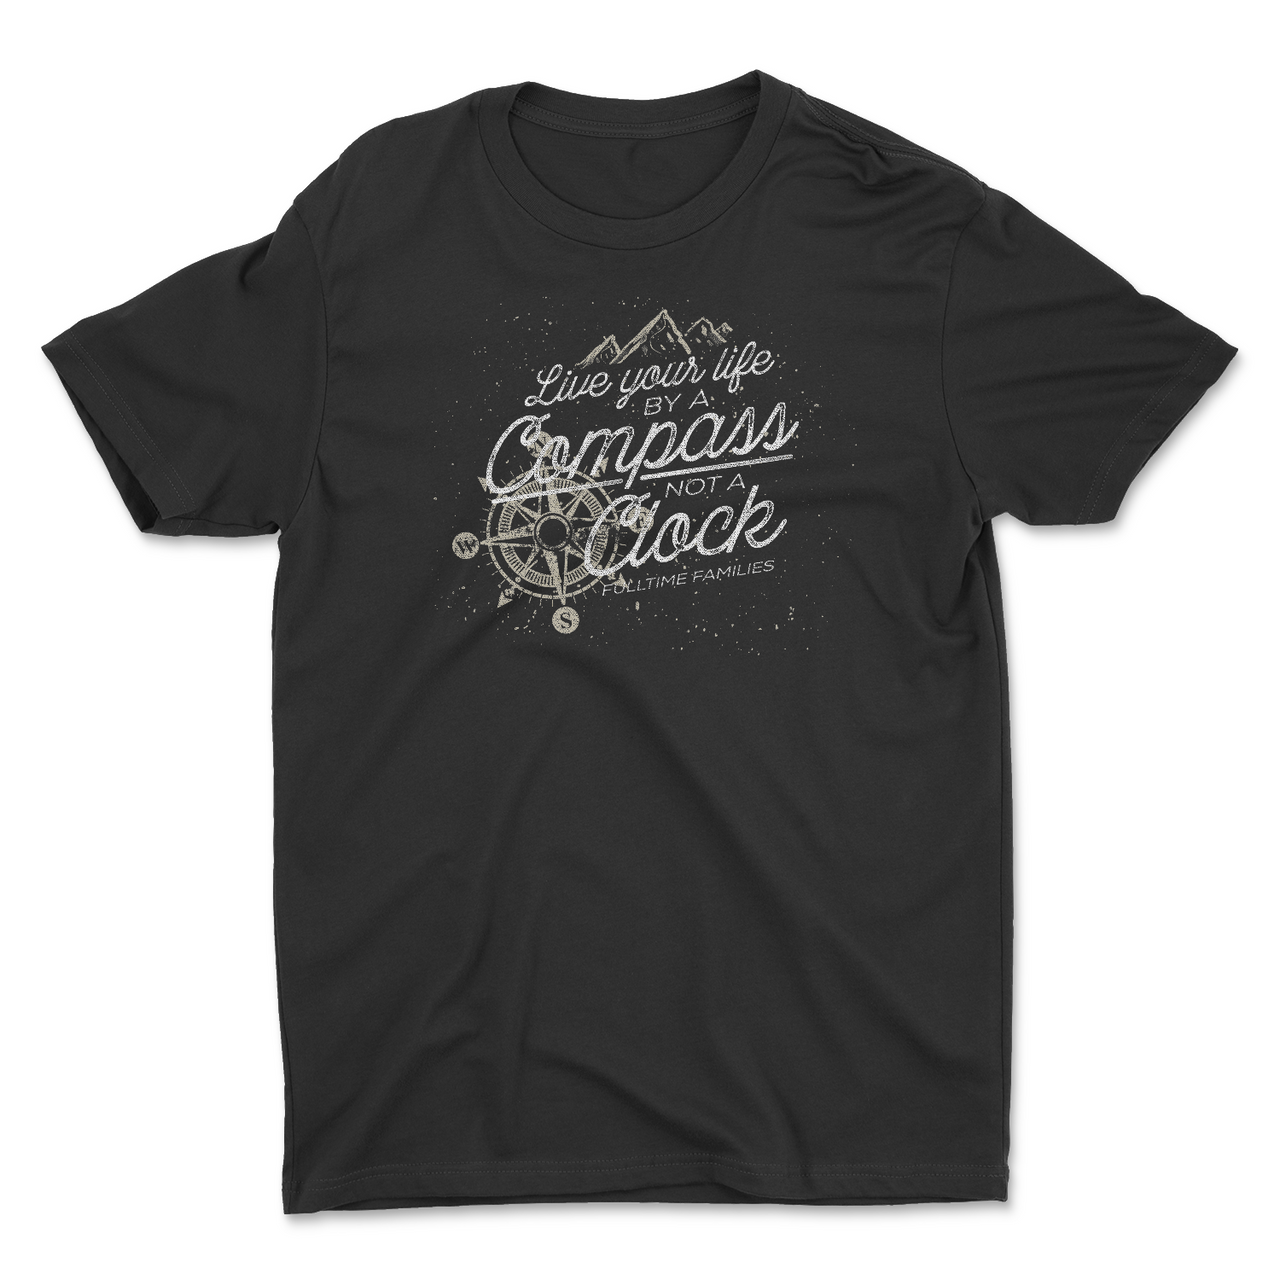 Live Your Life By a Compass Kids Shirt